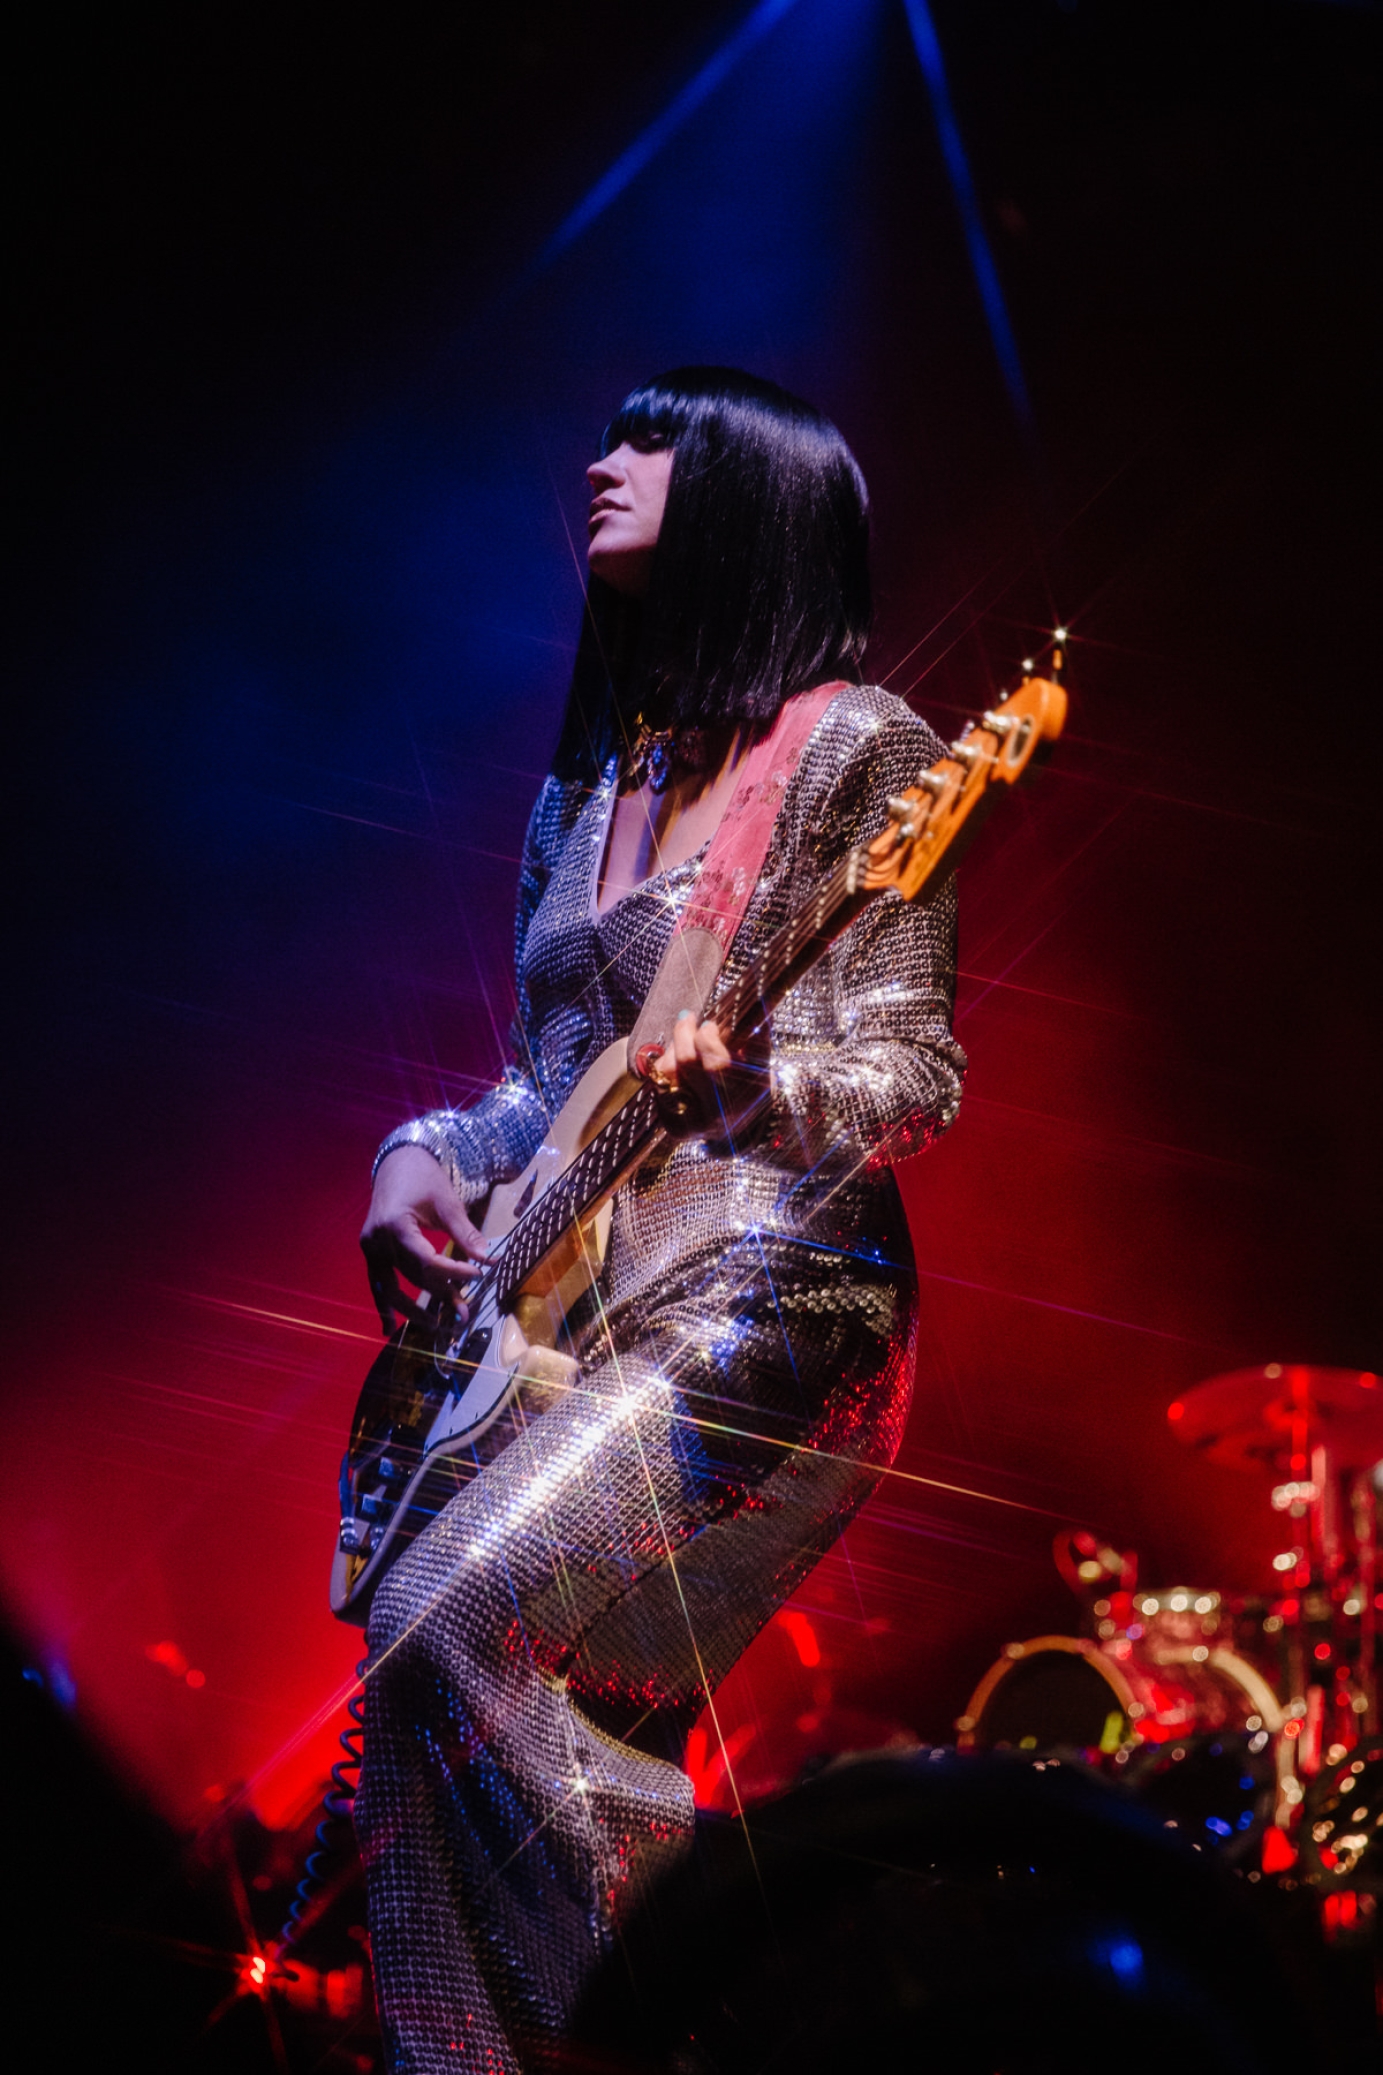 Live photography for Khruangbin by Kirby Gladstein